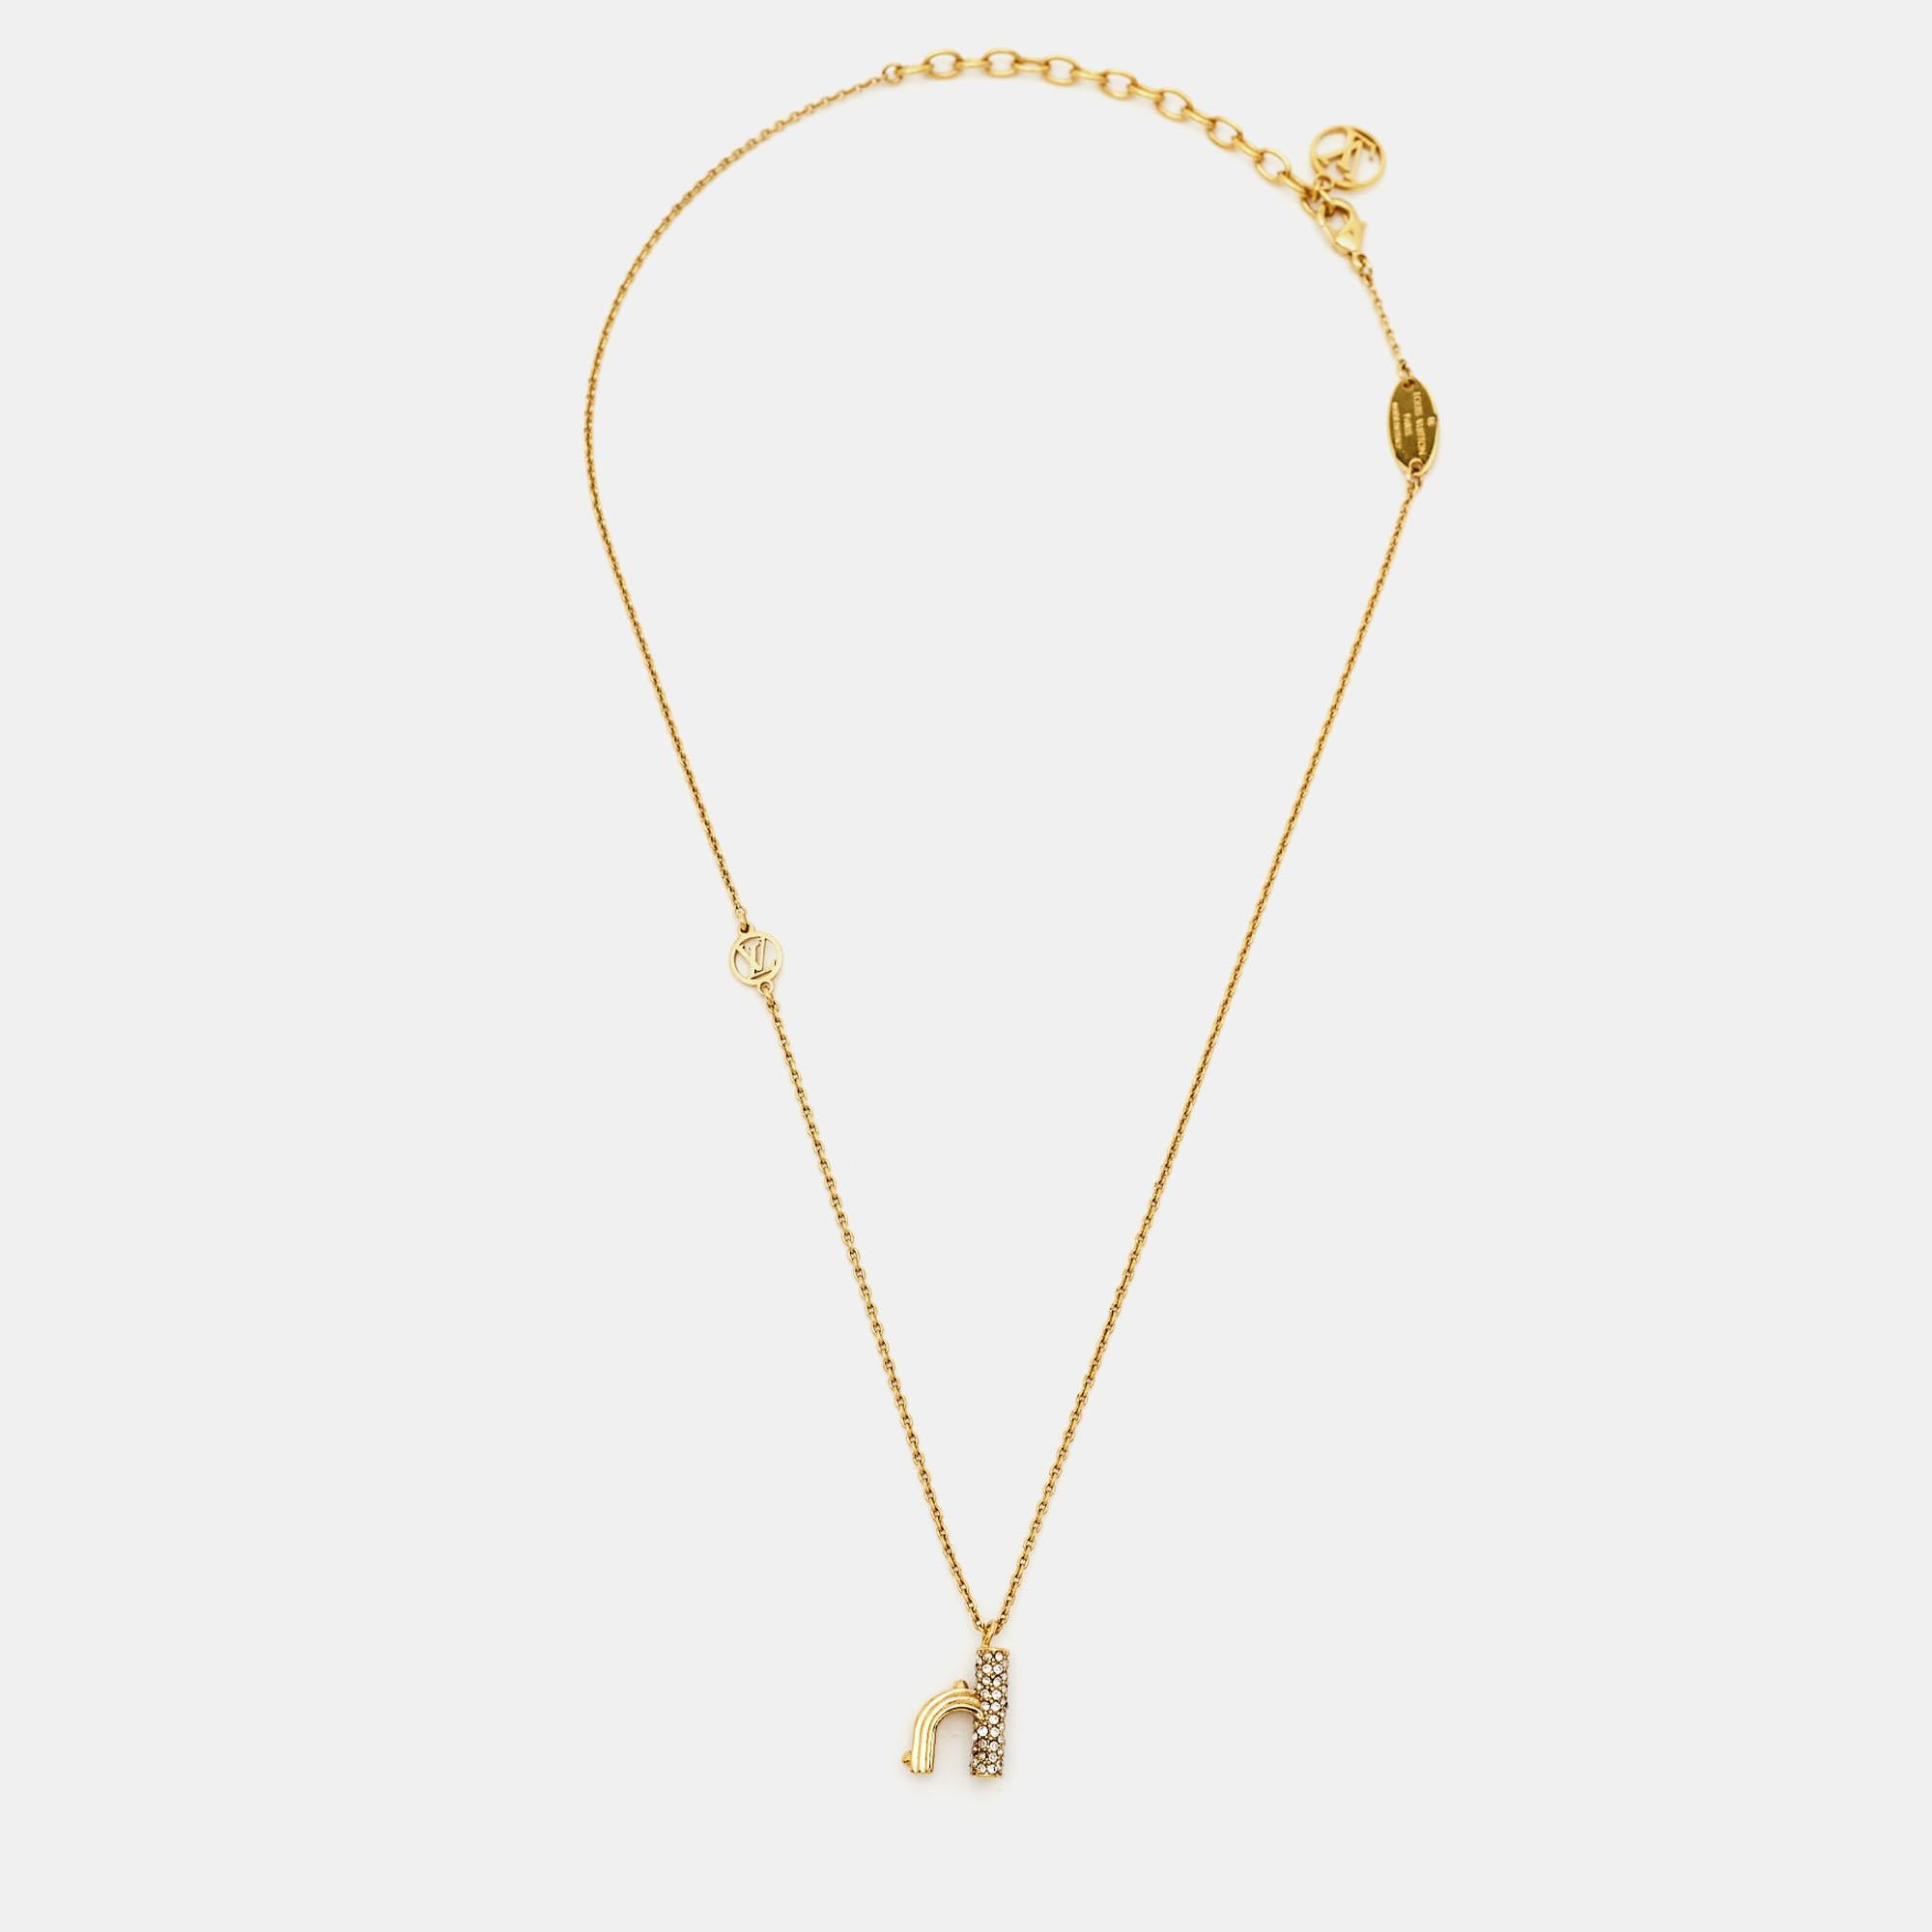 The Louis Vuitton LV & Me necklace is a luxurious fashion accessory. It features a gold-tone chain adorned with sparkling crystals and a pendant in the shape of the letter 